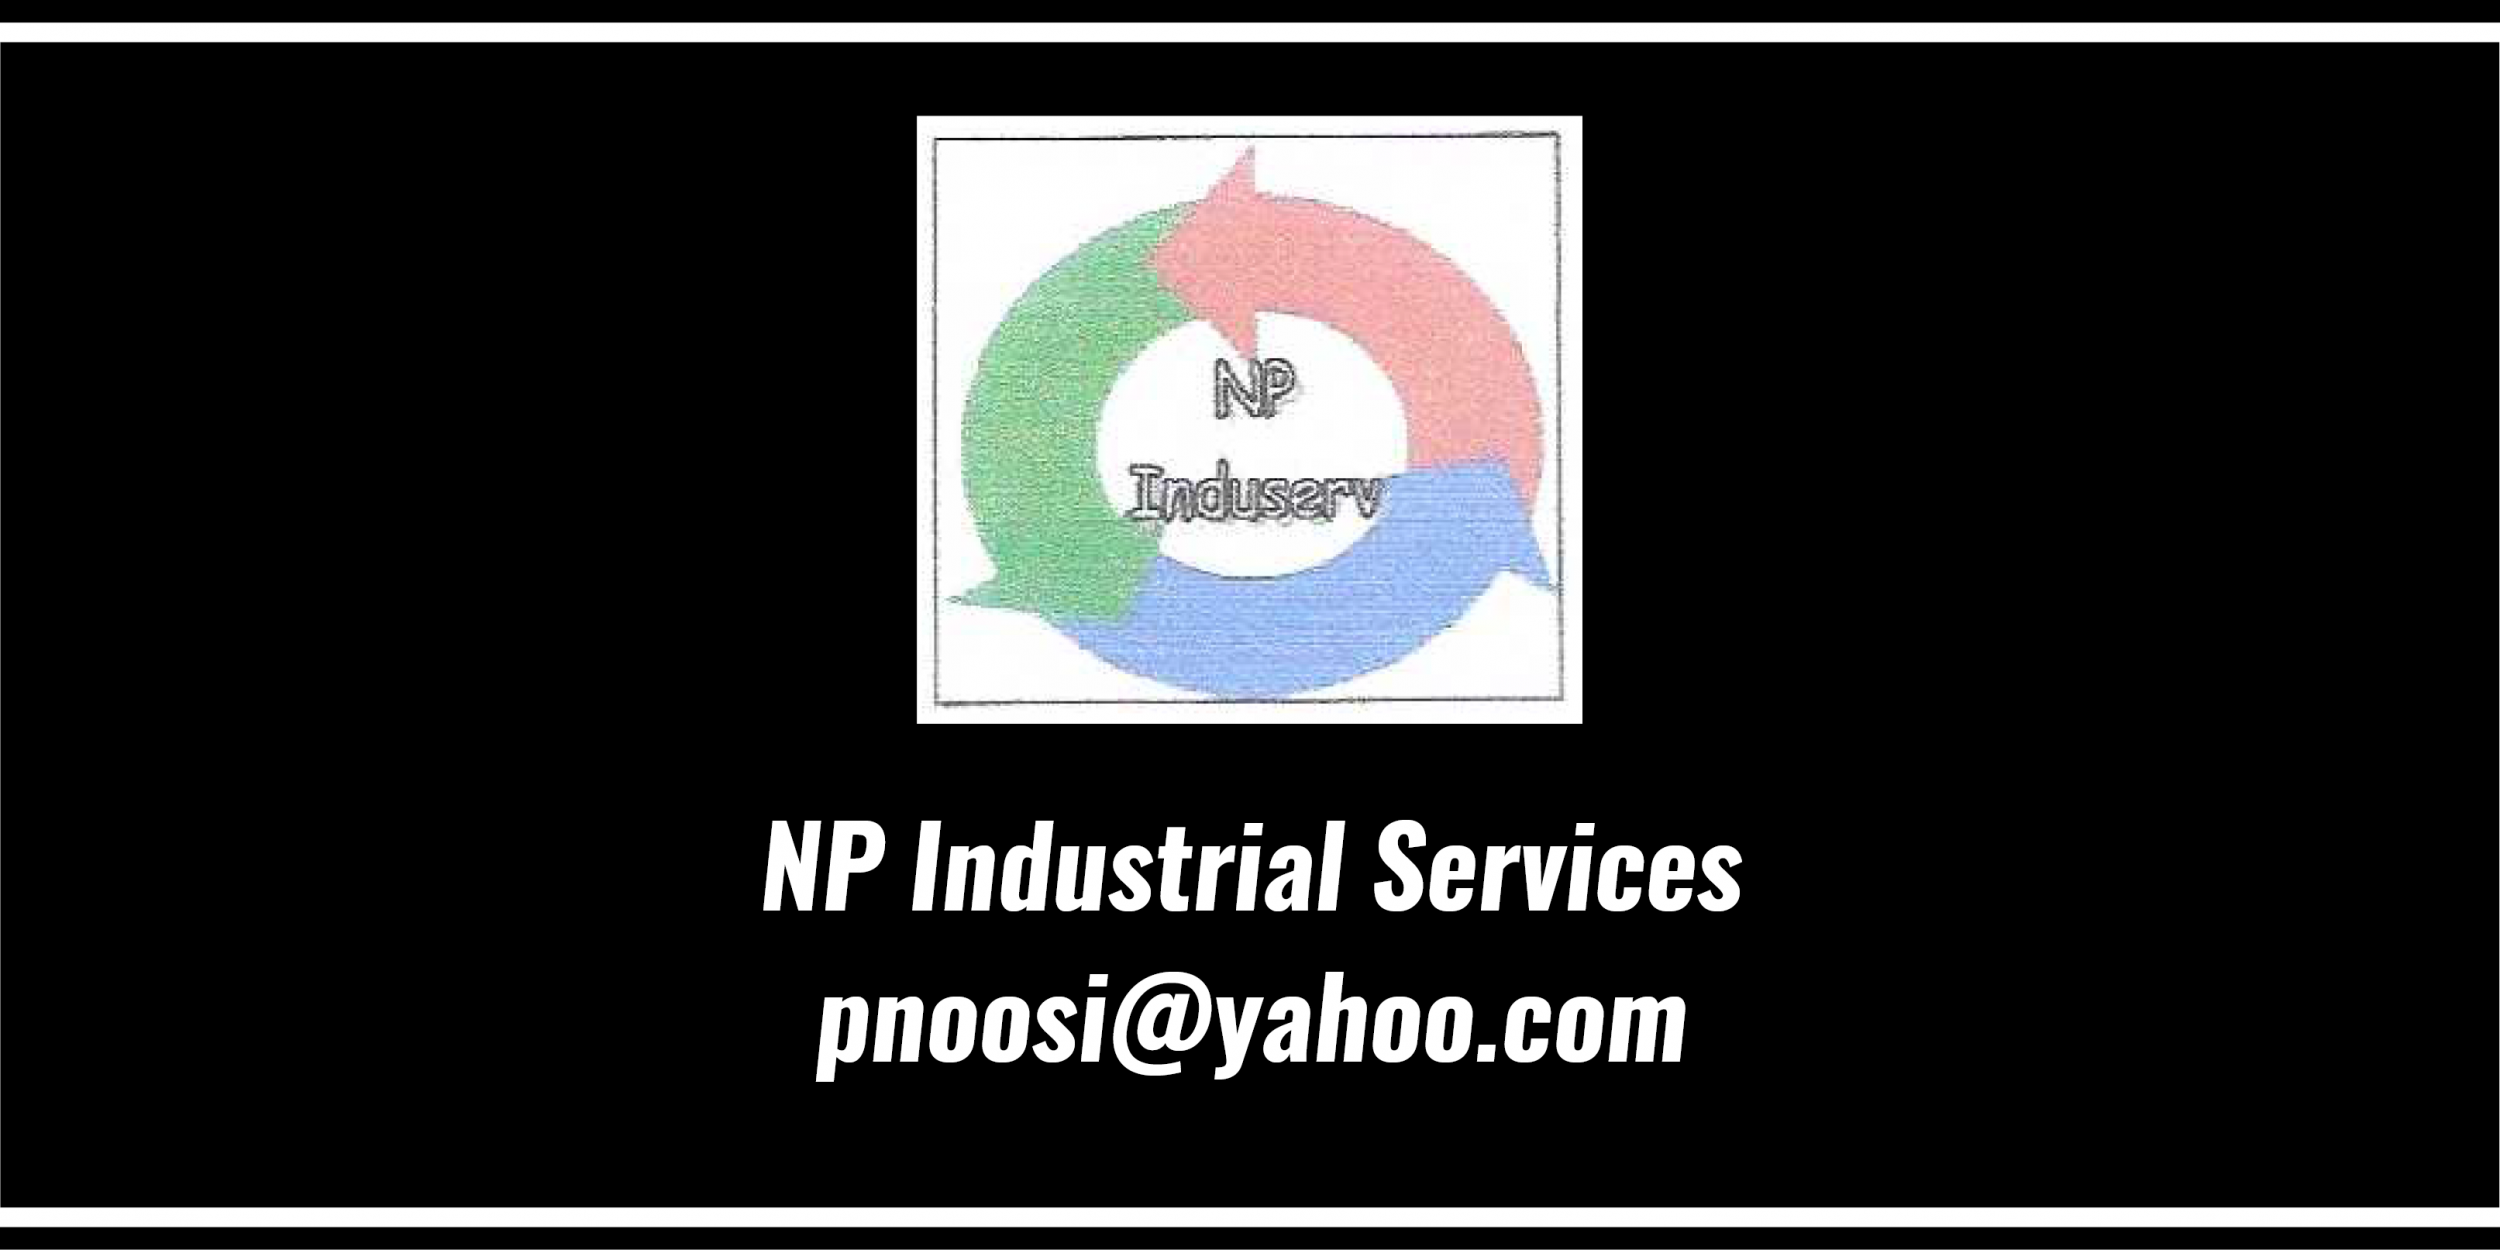 NP Industrial Services